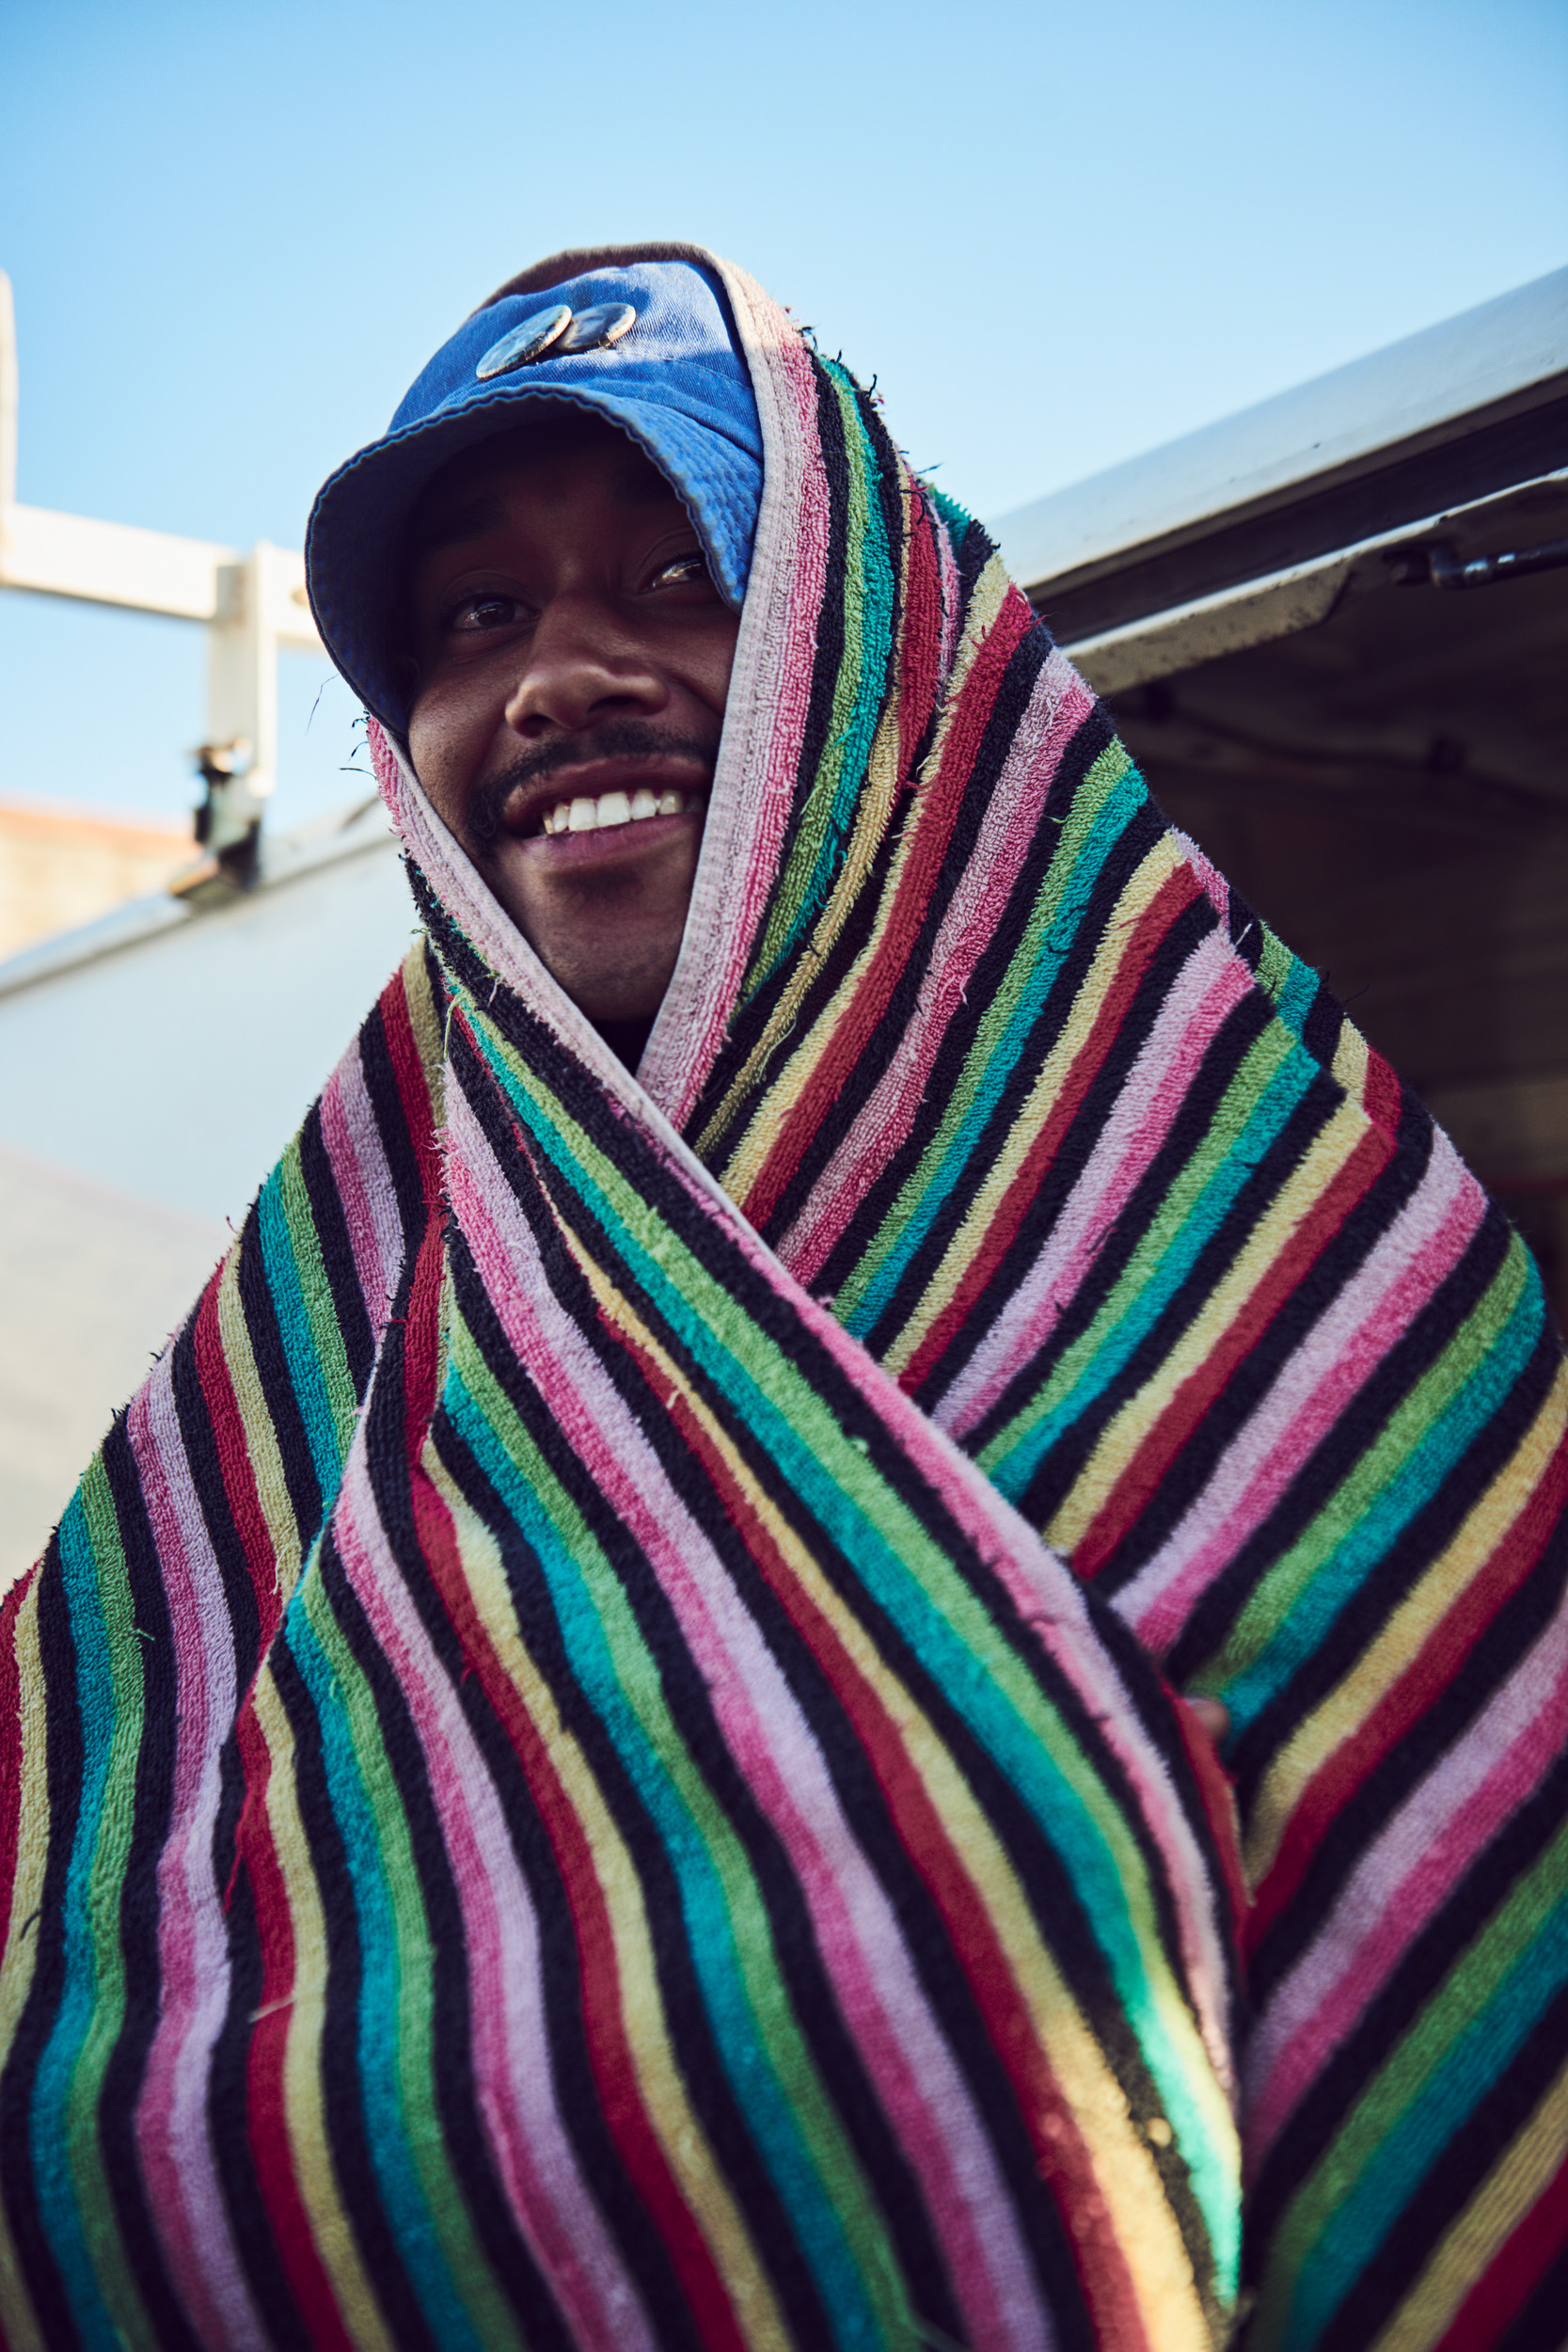 A man wrapped in a colorful blanket wearing sunglasses.